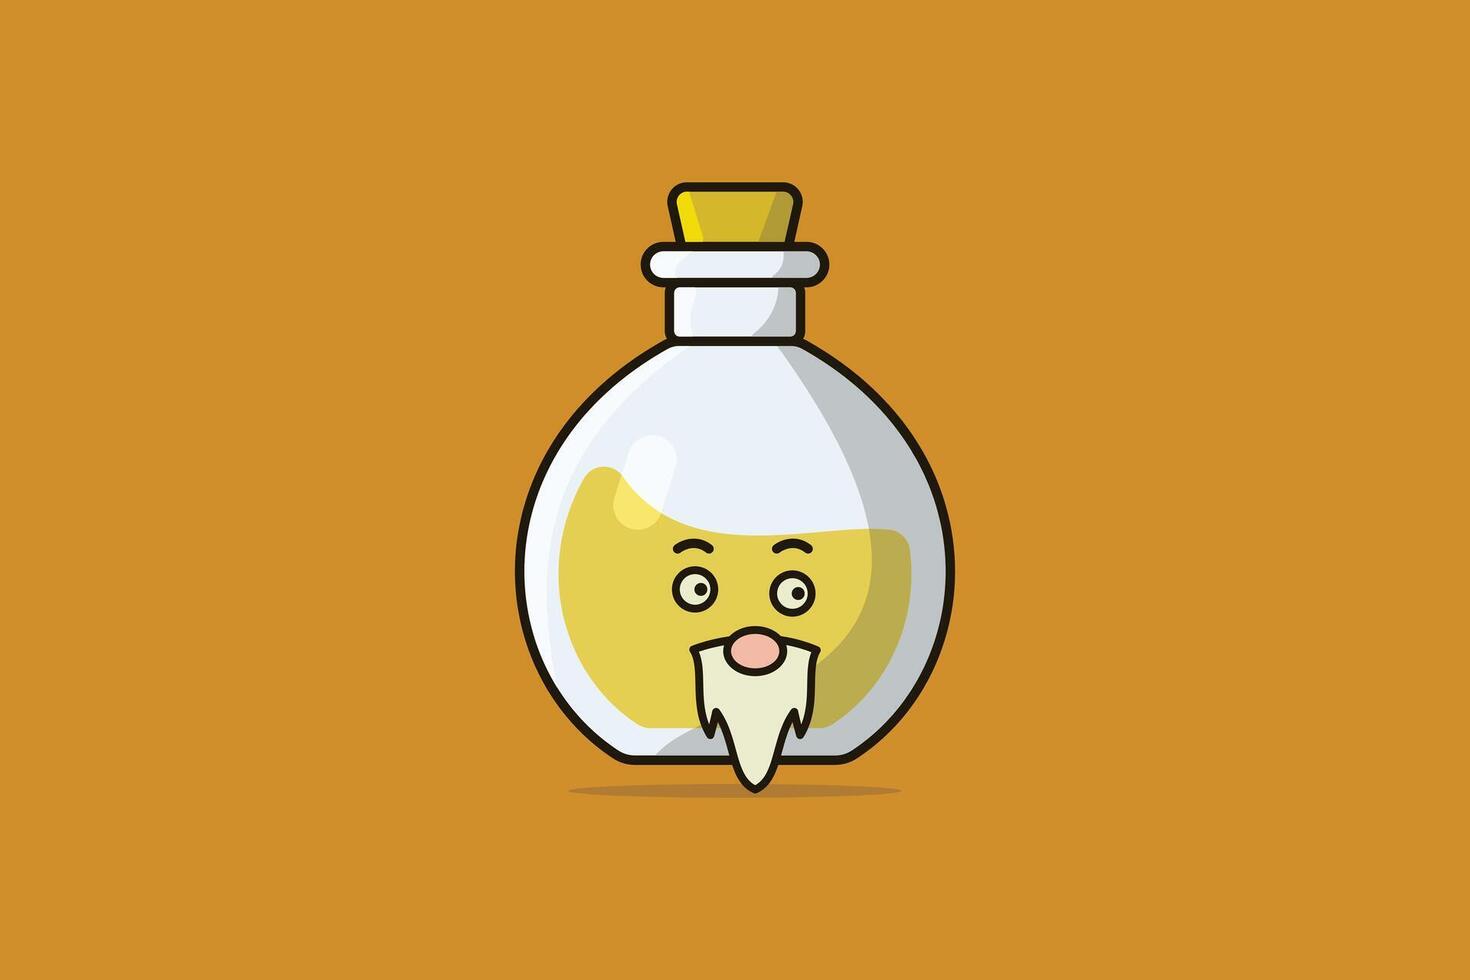 Potion Bottle with Cartoon Face vector illustration. Science object icon concept. Cartoon face with Potion vector design. Halloween drink design.